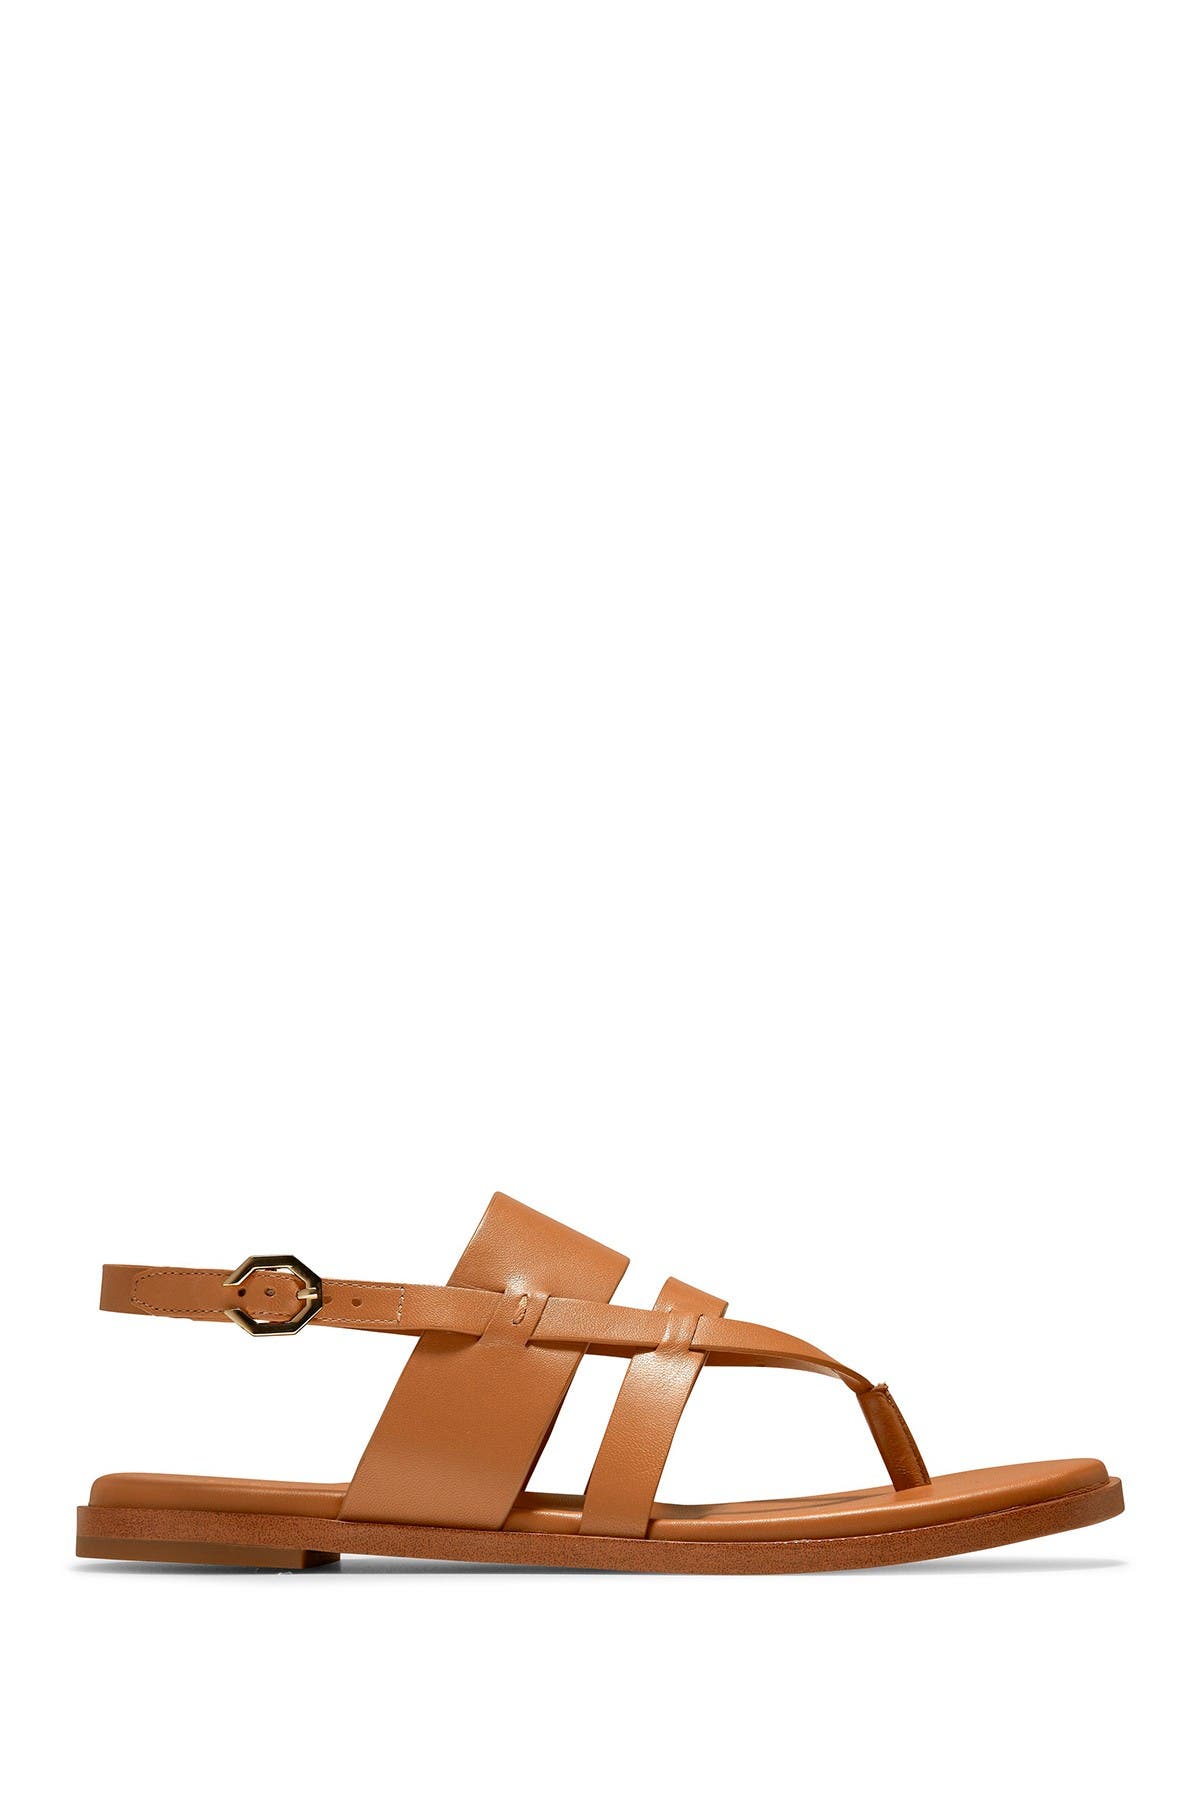 Cole Haan | Finley Leather Grand Thong Sandal | Nordstrom Rack